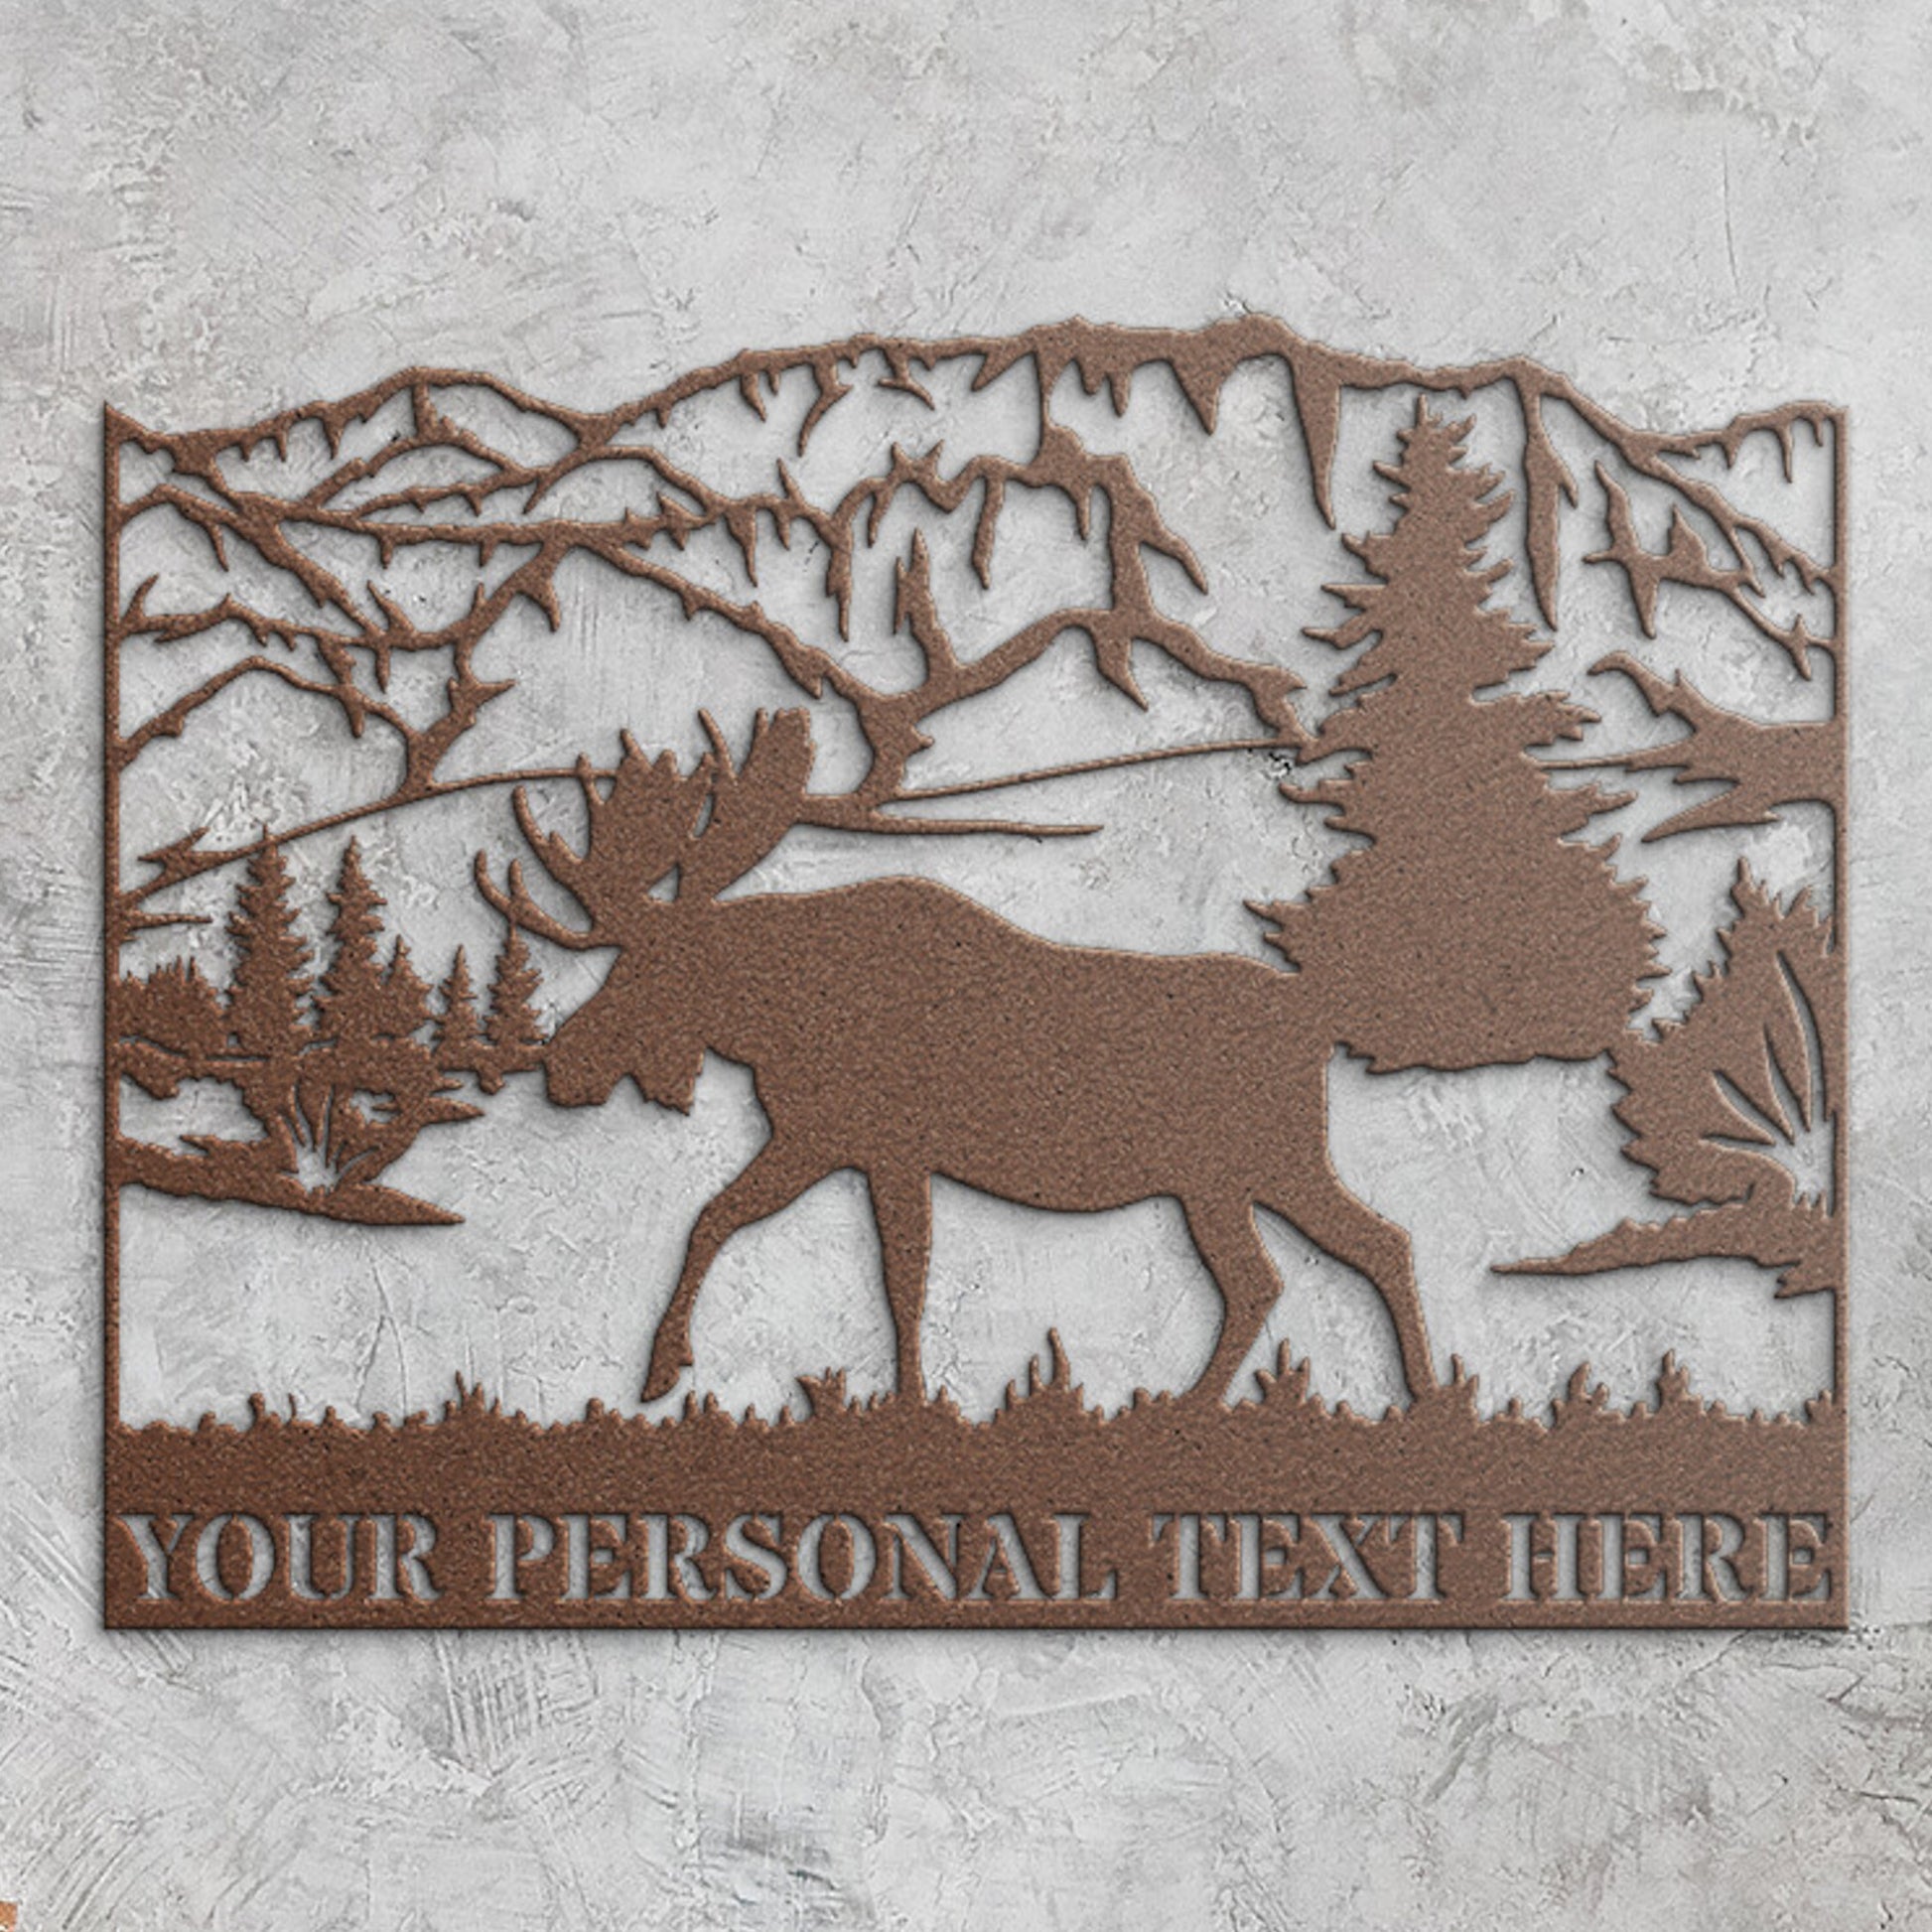 Personalized Moose In The Mountains Name Metal Sign. Custom Moose Wall Decor Gift. Moose Wall Art Steel Sign Monogram, Wildlife Wall Hanging